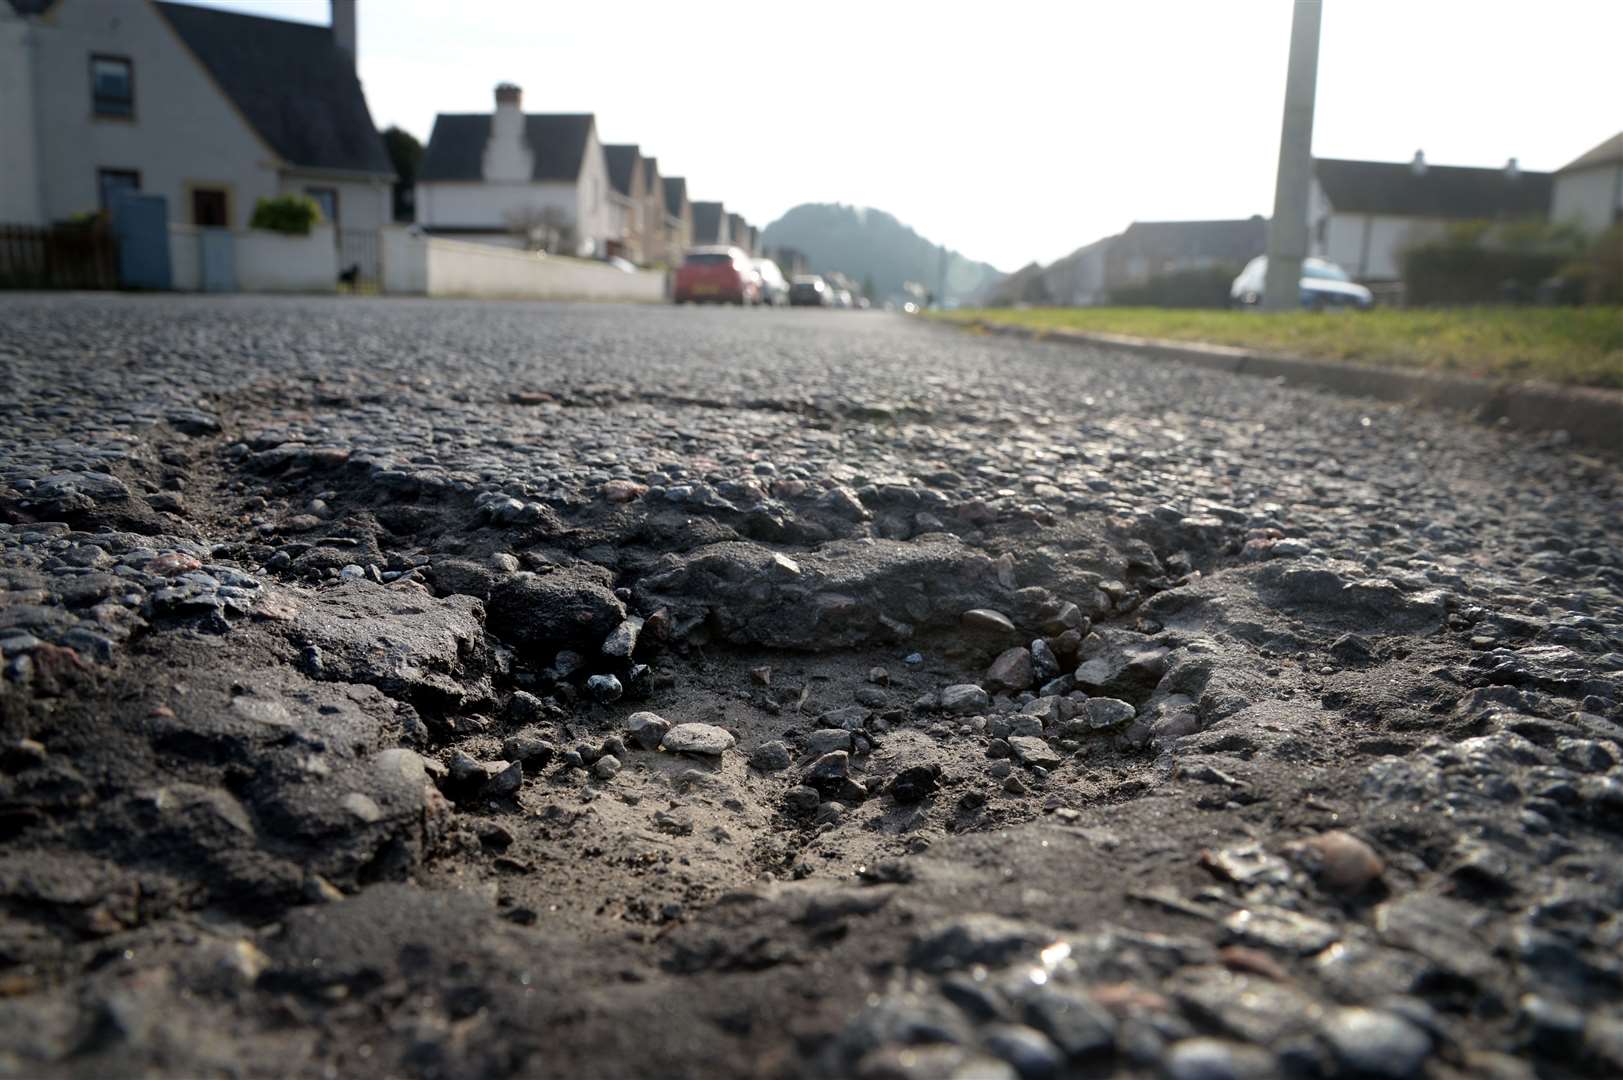 Potholes are a growing menace in many communities.